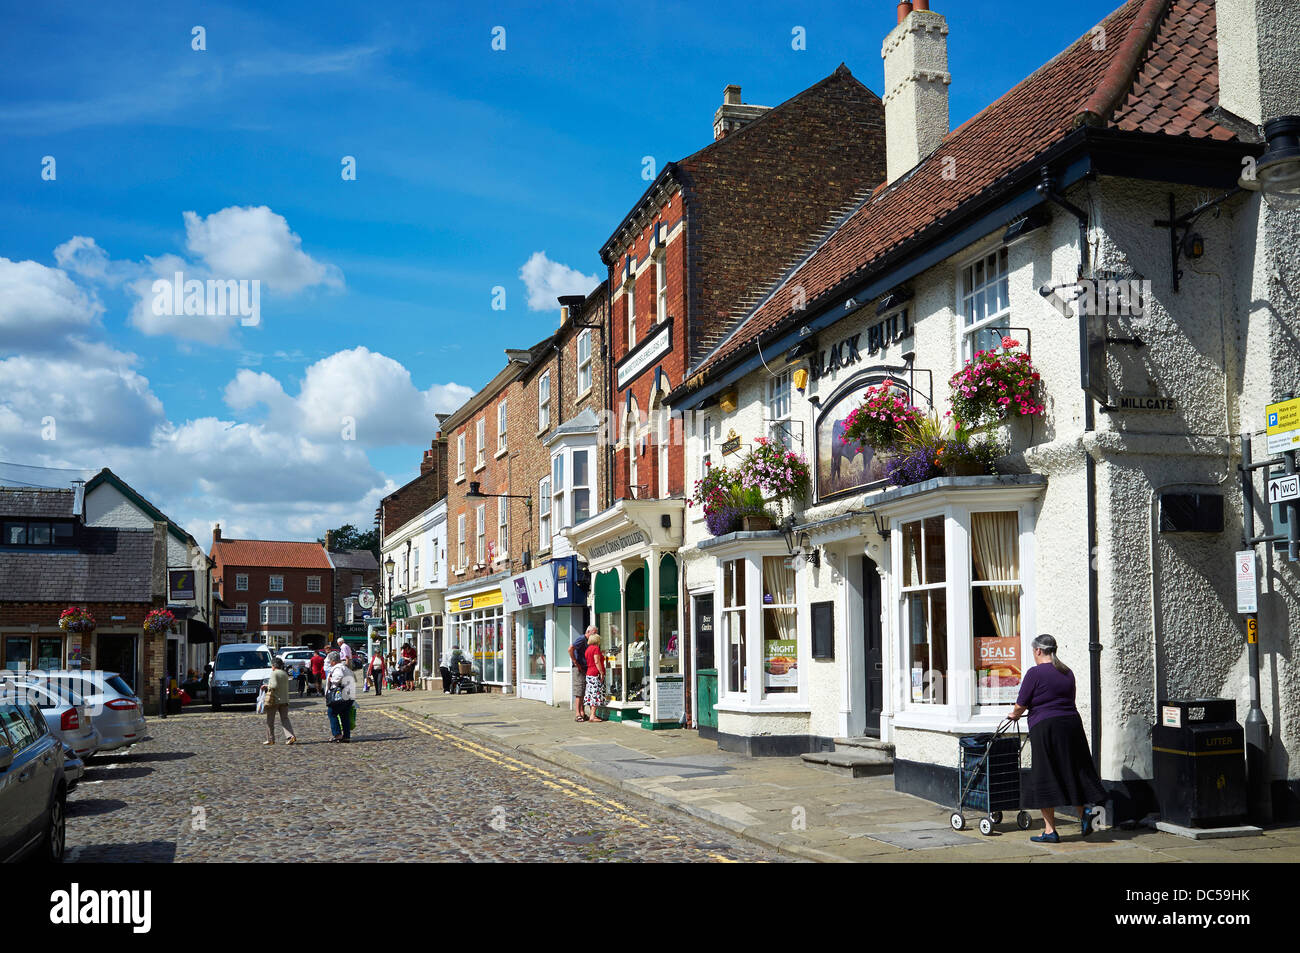 The market square of the North Yorkshire Market Town of Thirsk, Northern England, UK Stock Photo